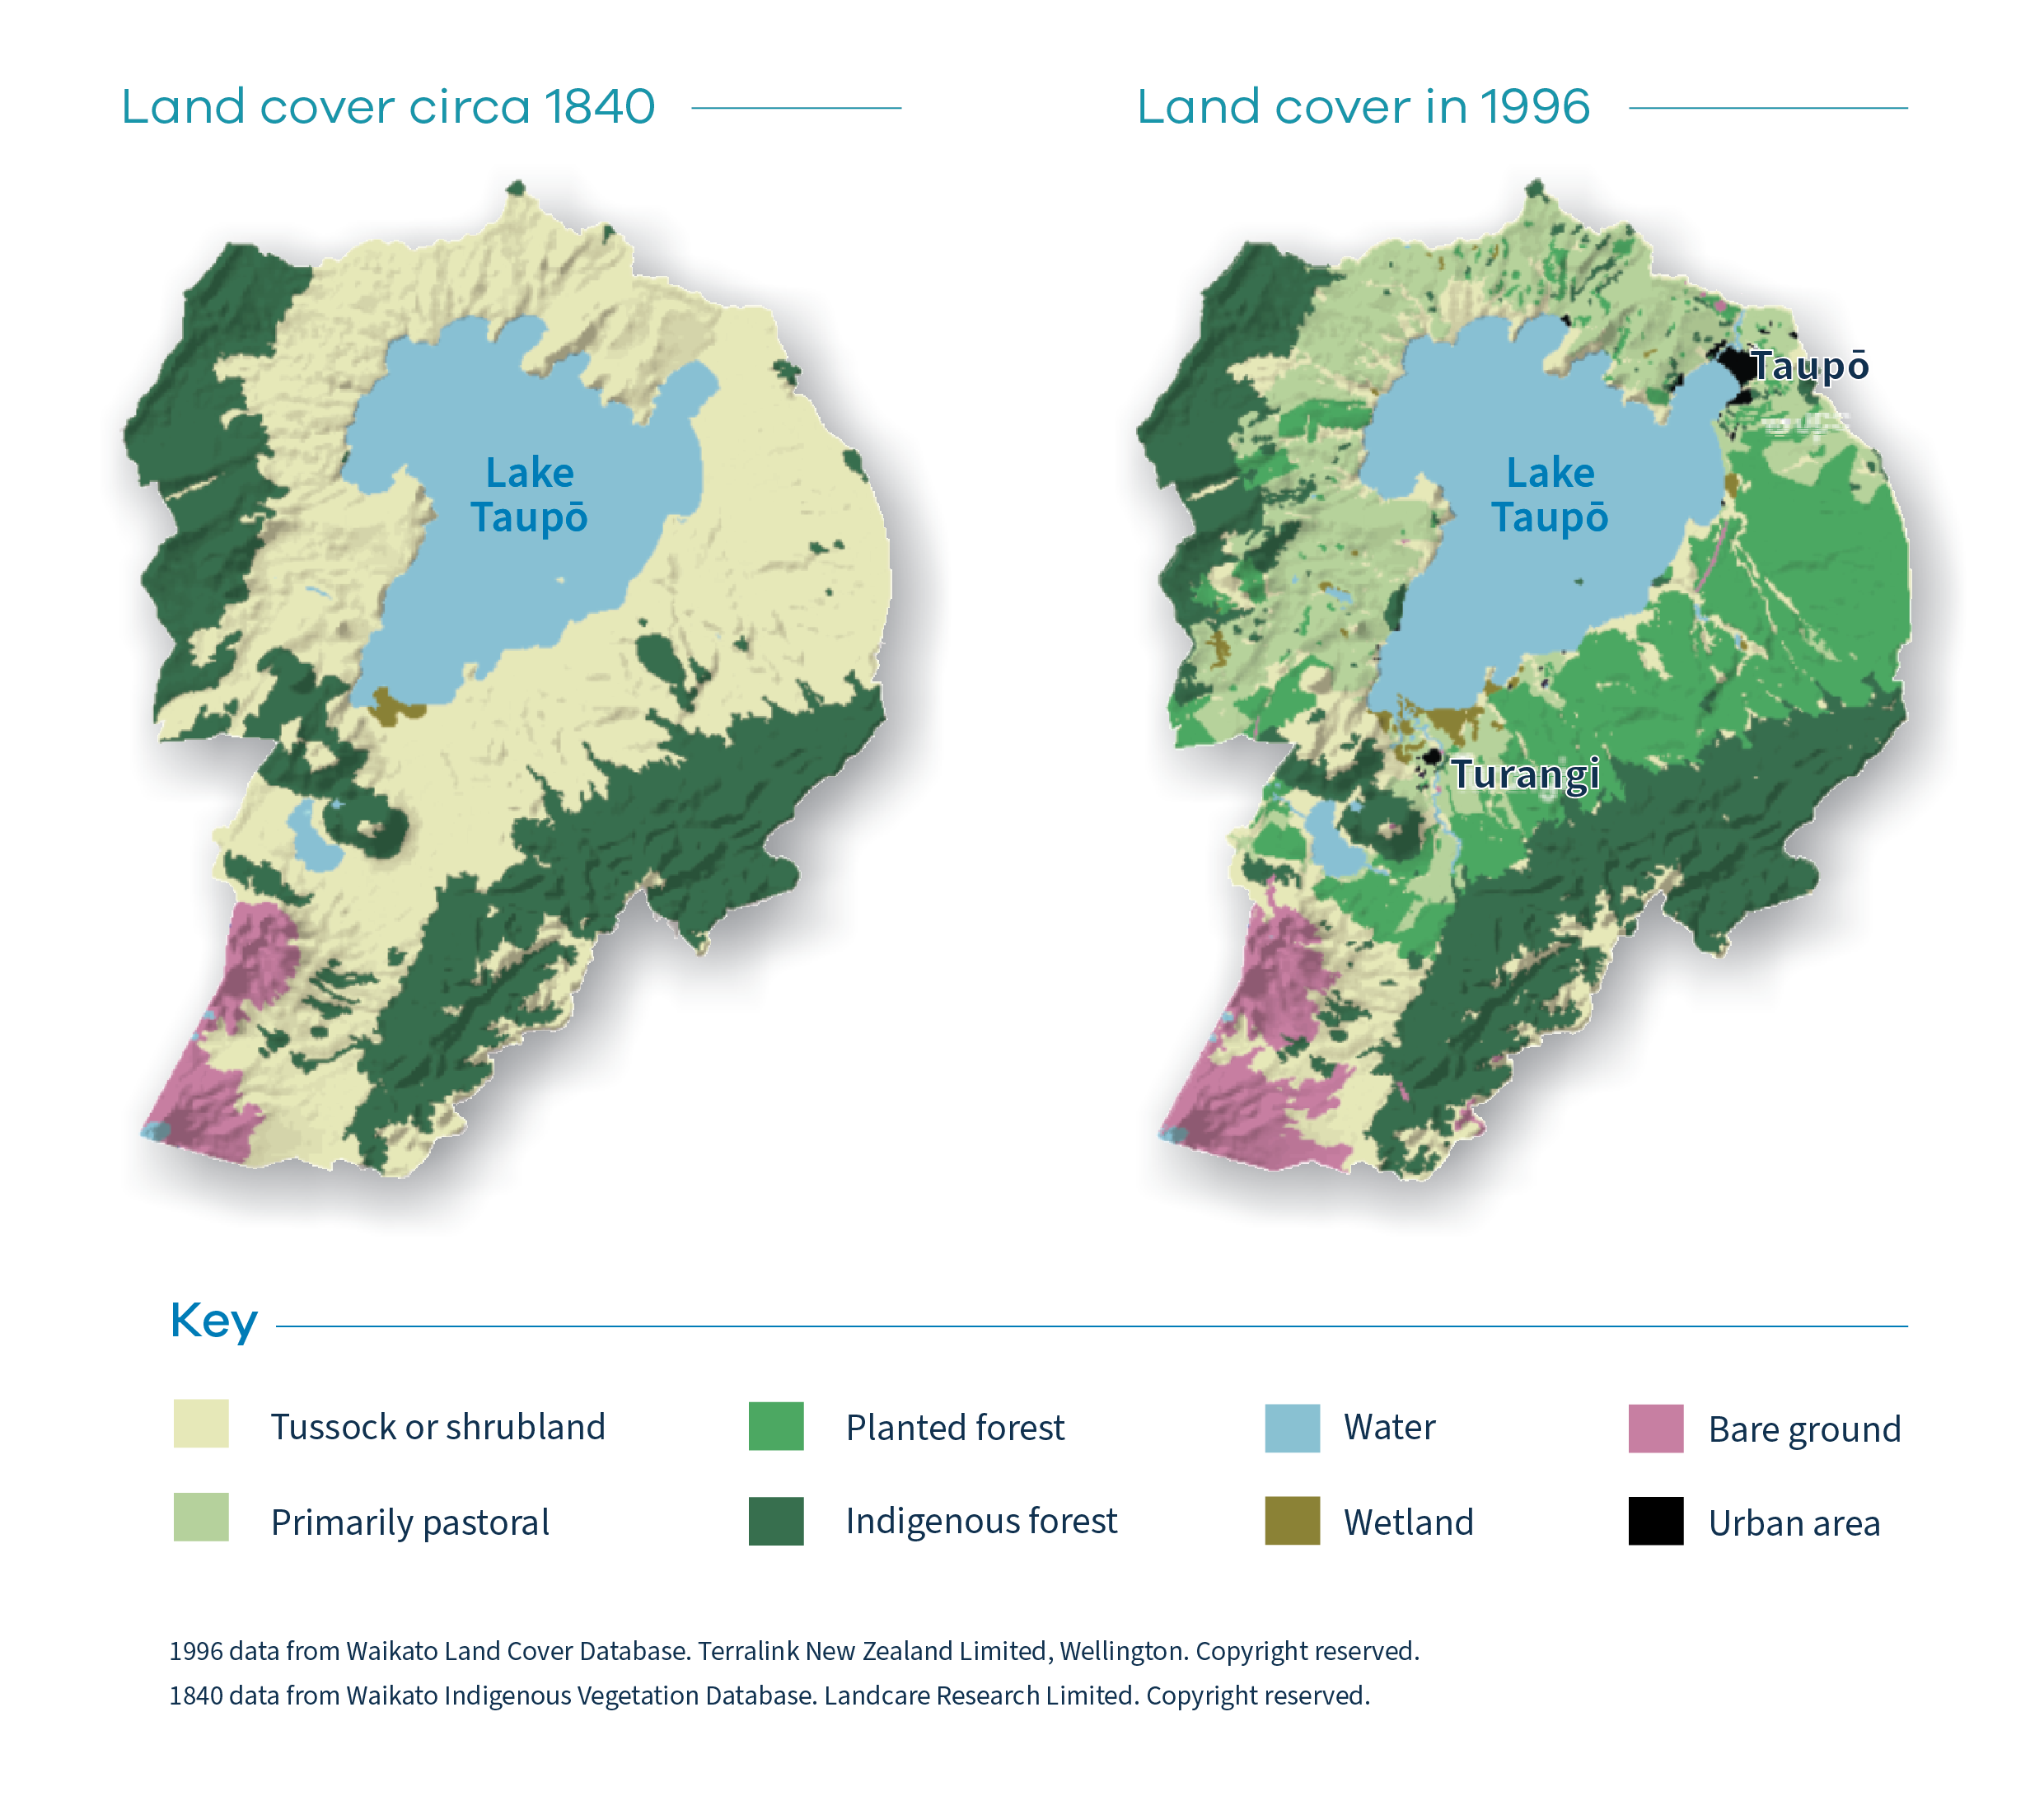 Maps showing change in land cover and use in Lake Taupō